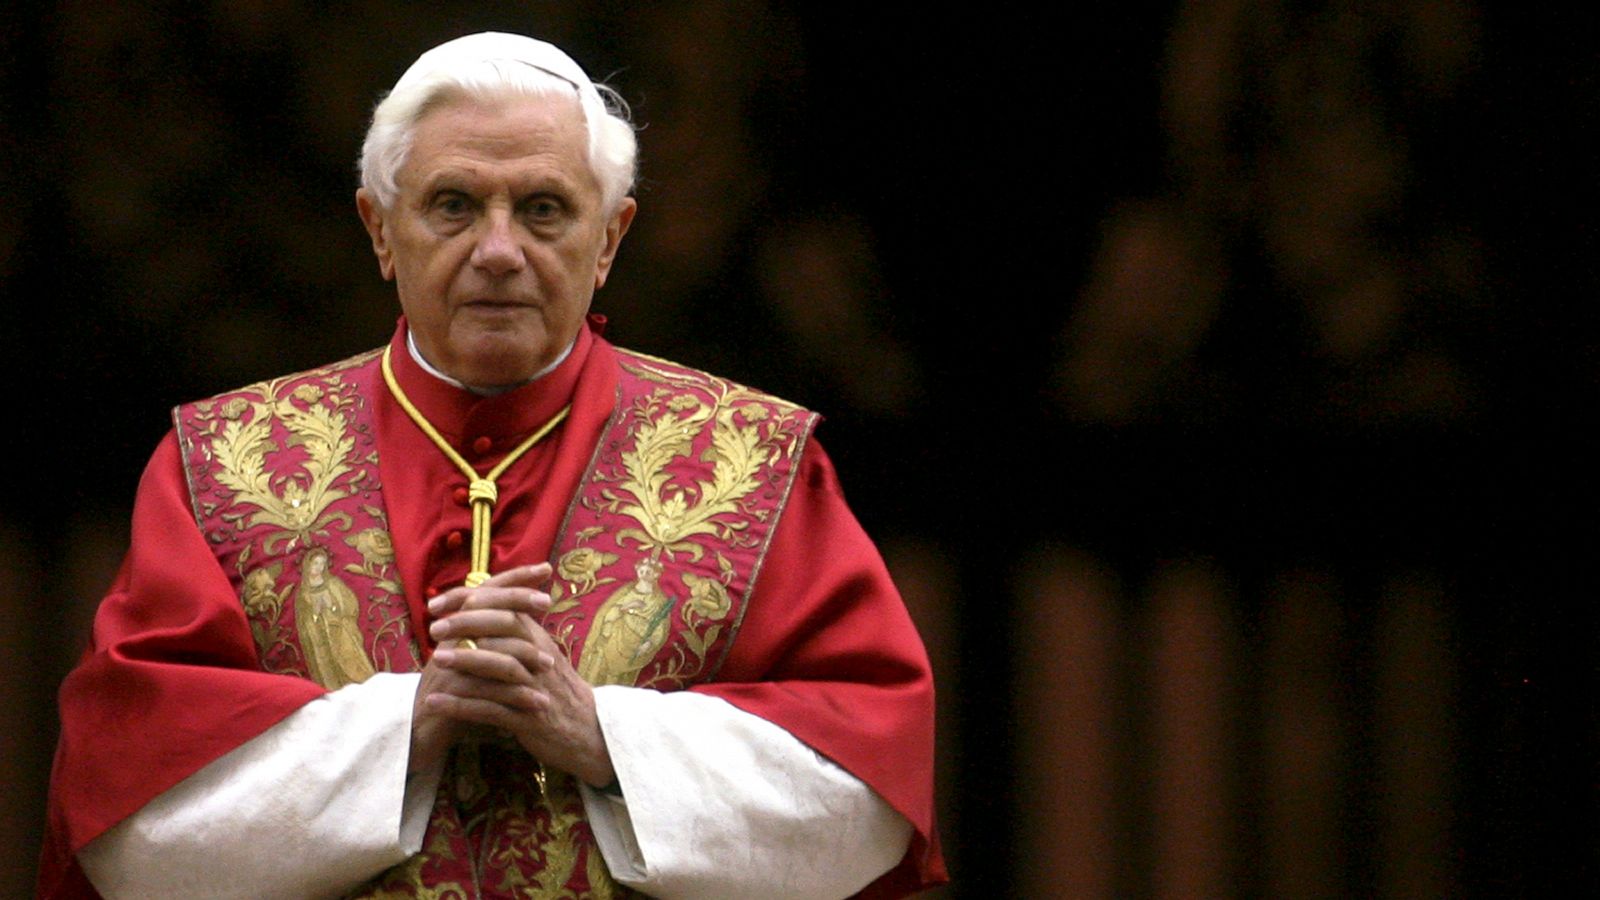 World leaders pay tribute to Pope Benedict XVI after his death